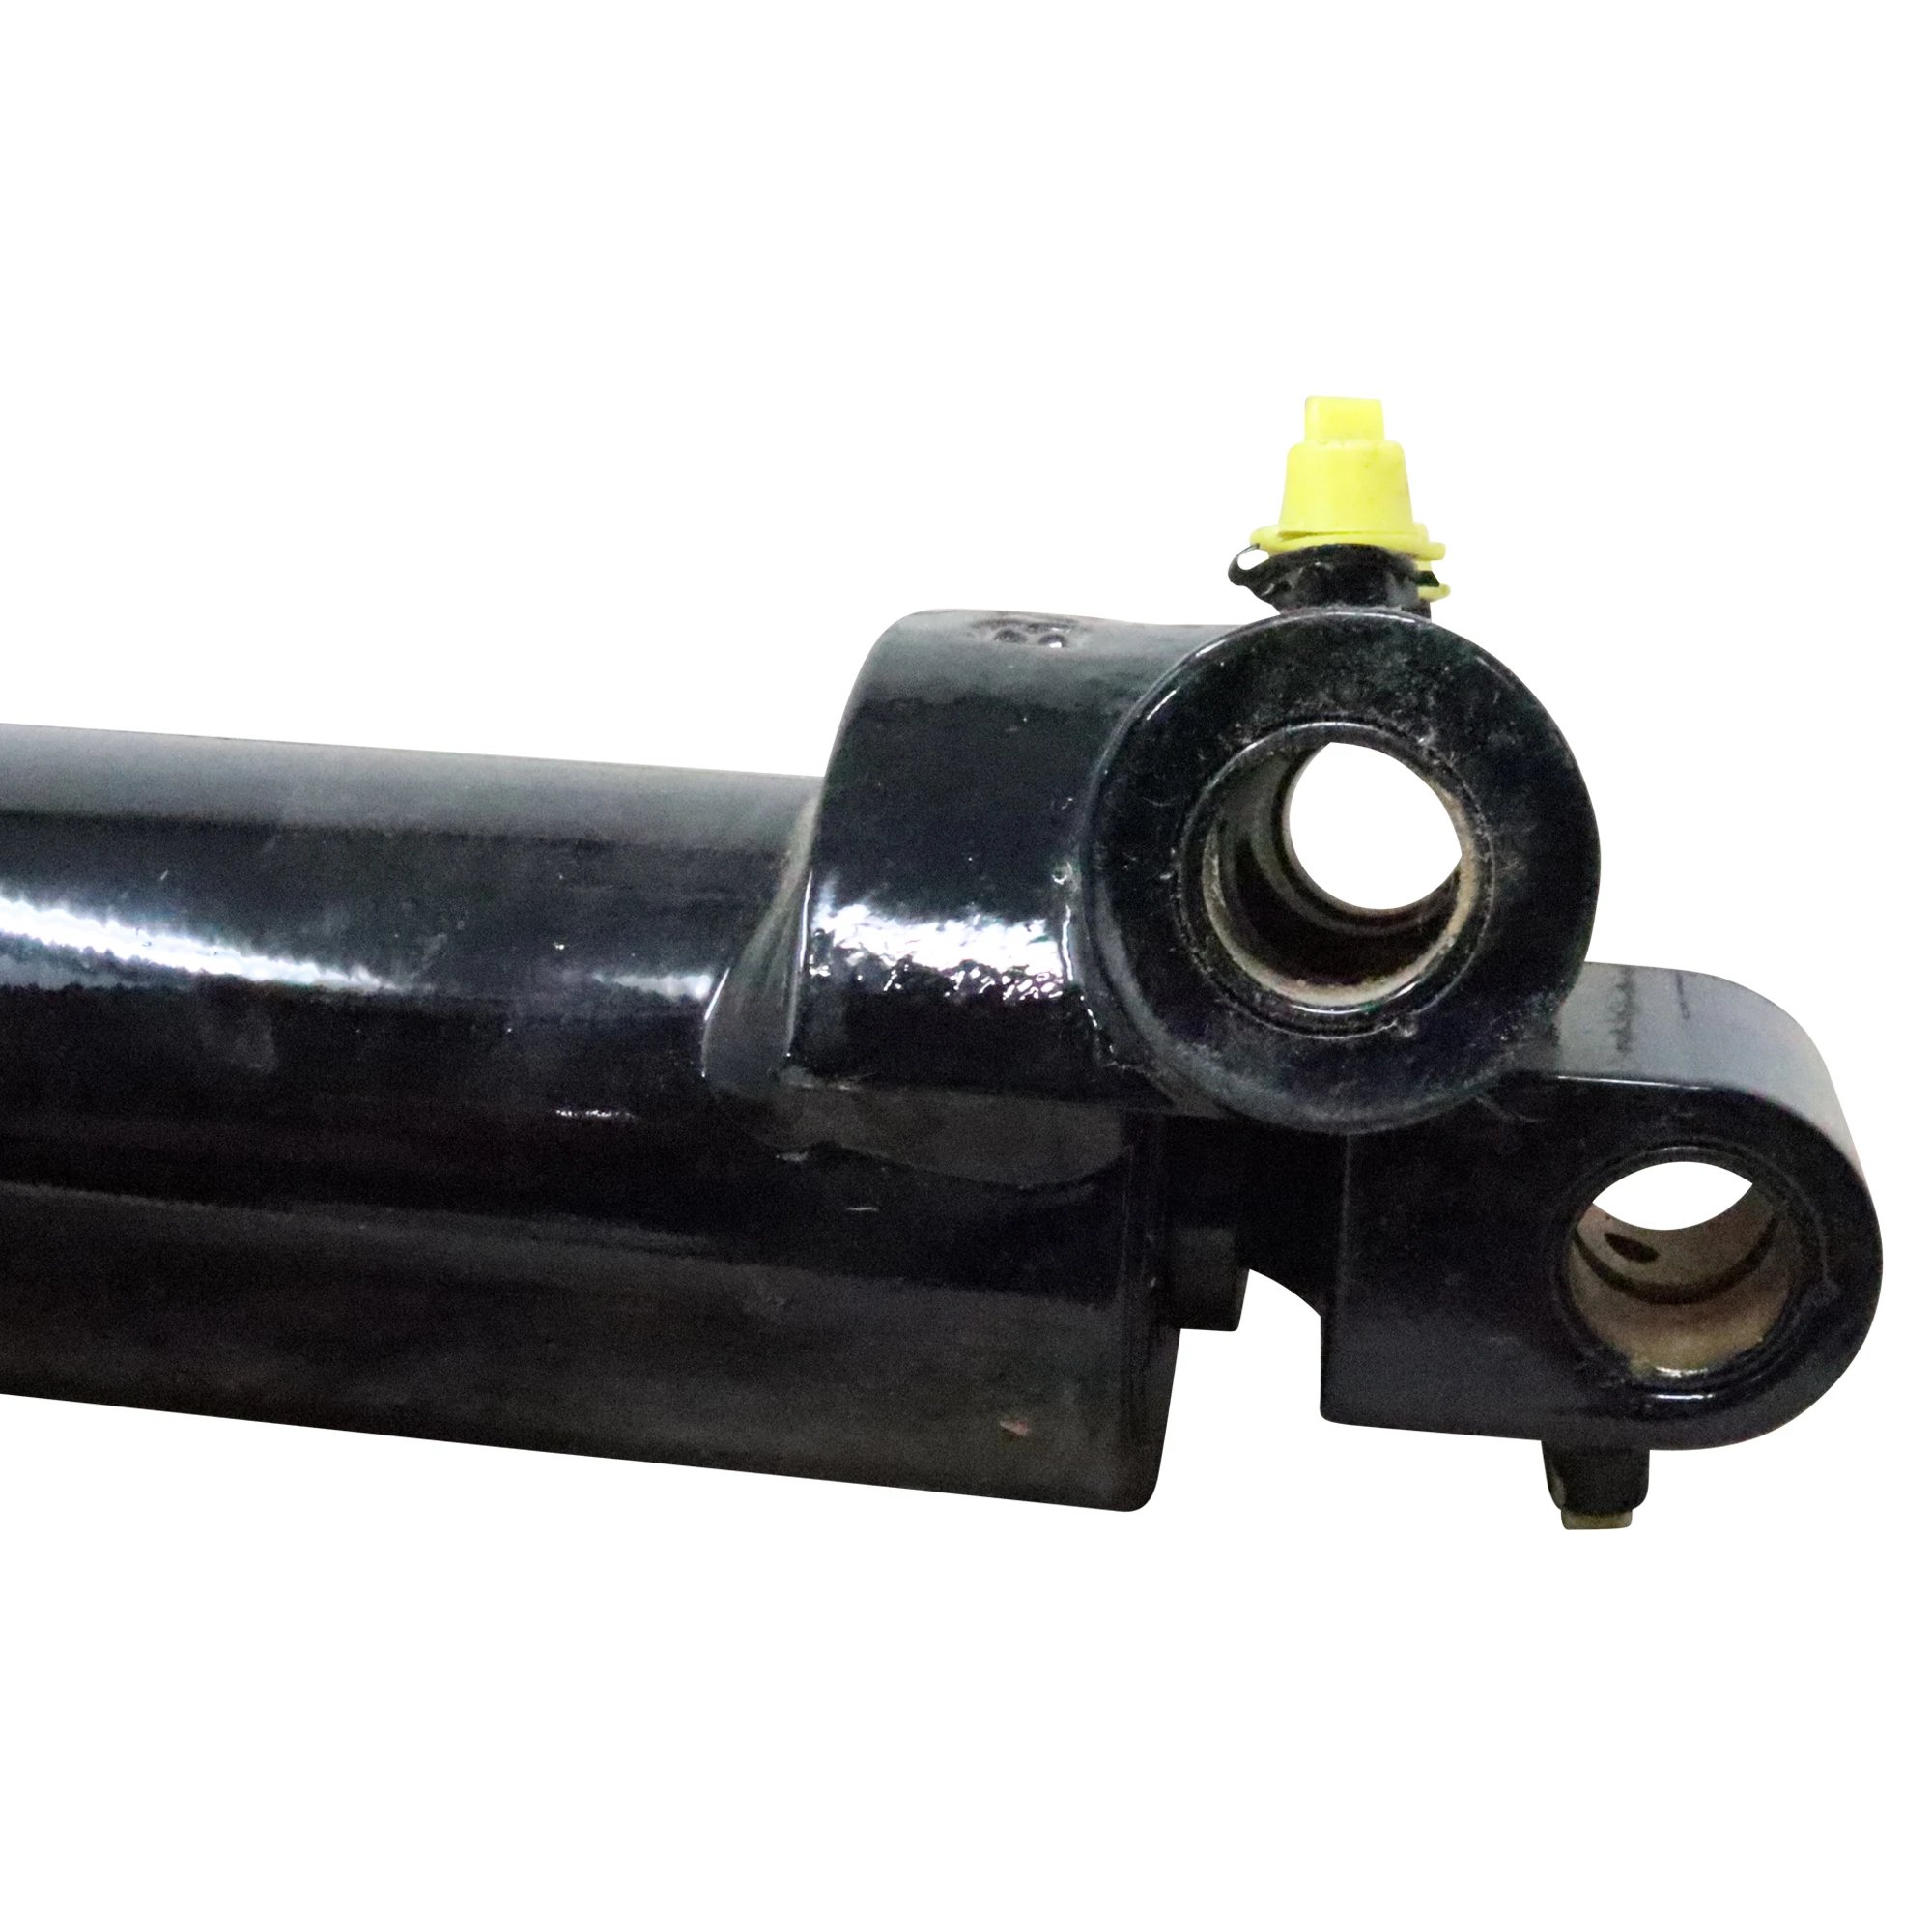 Wastebuilt® Replacement for McNeilus Cylinder, Tipper Slave ,1.75X1.82X .625